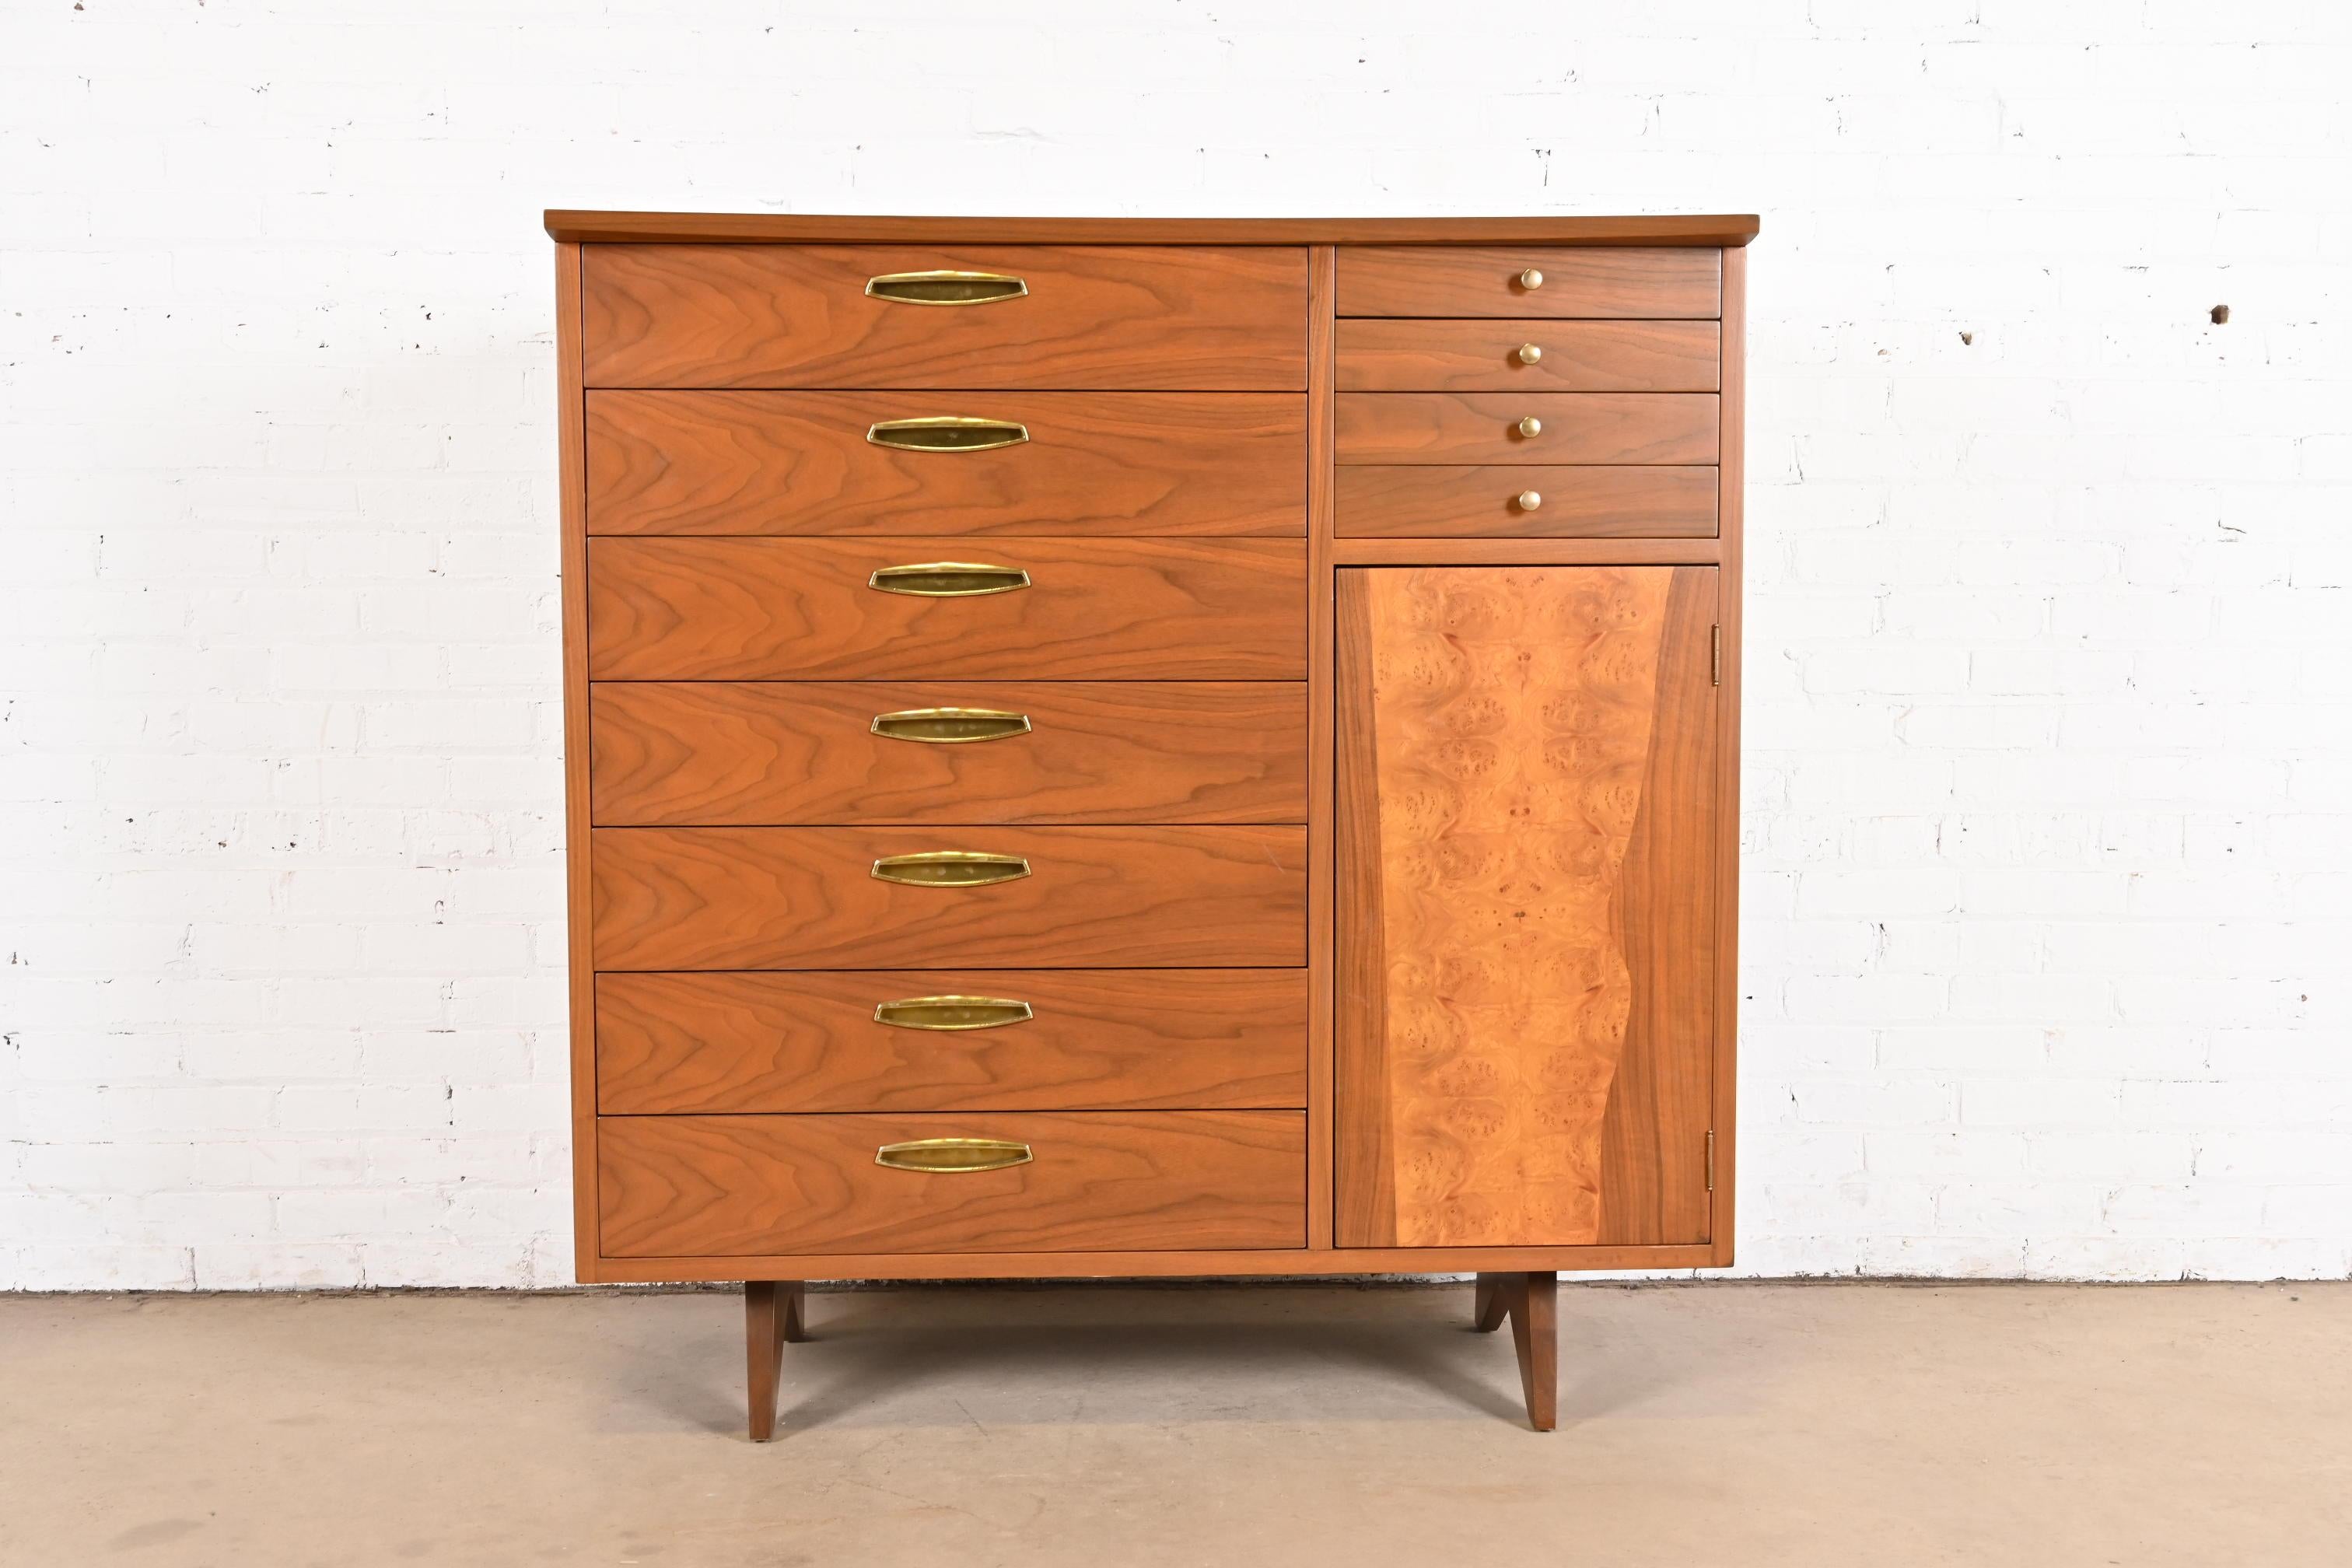 A very rare and exceptional mid-century Organic Modern gentleman's chest or highboy dresser

By George Nakashima for Widdicomb Furniture, 